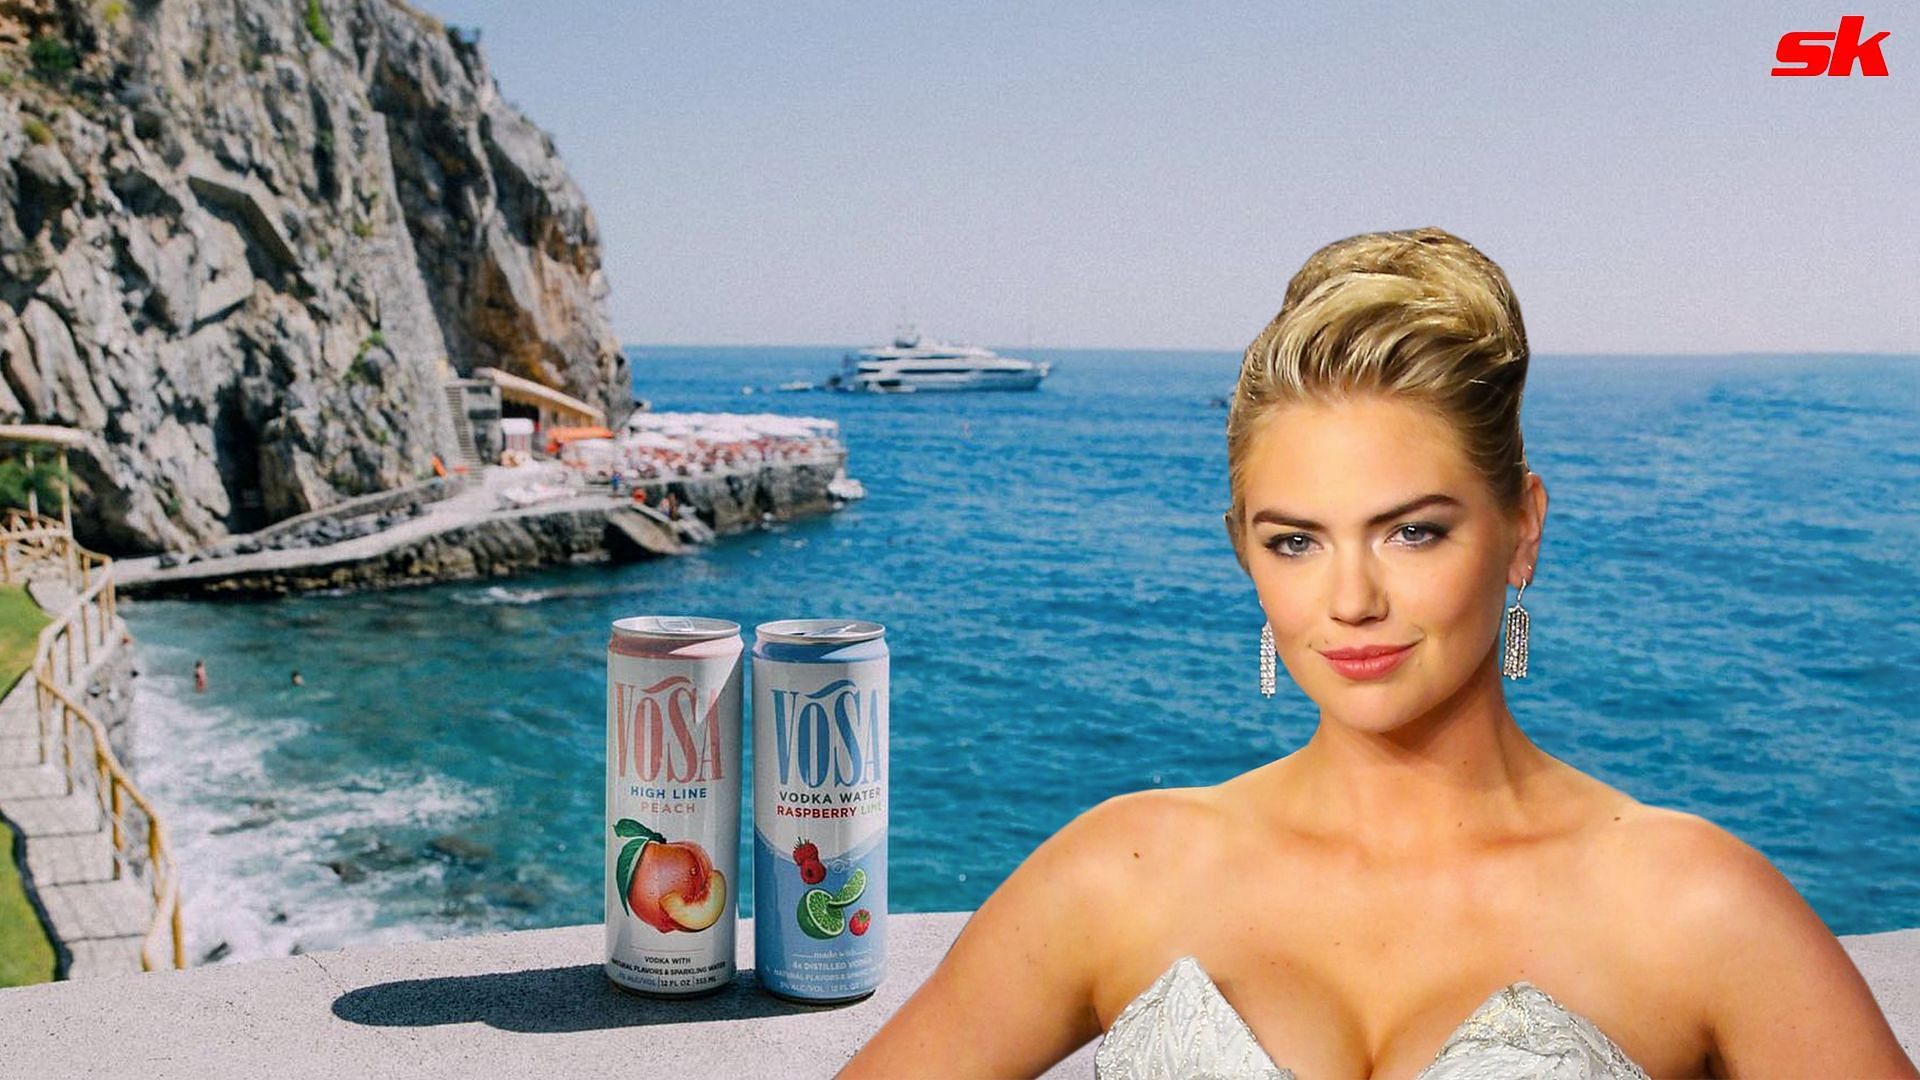 Kate Upton adds a dash of glamour to Vosa Vodka Water as co-owner